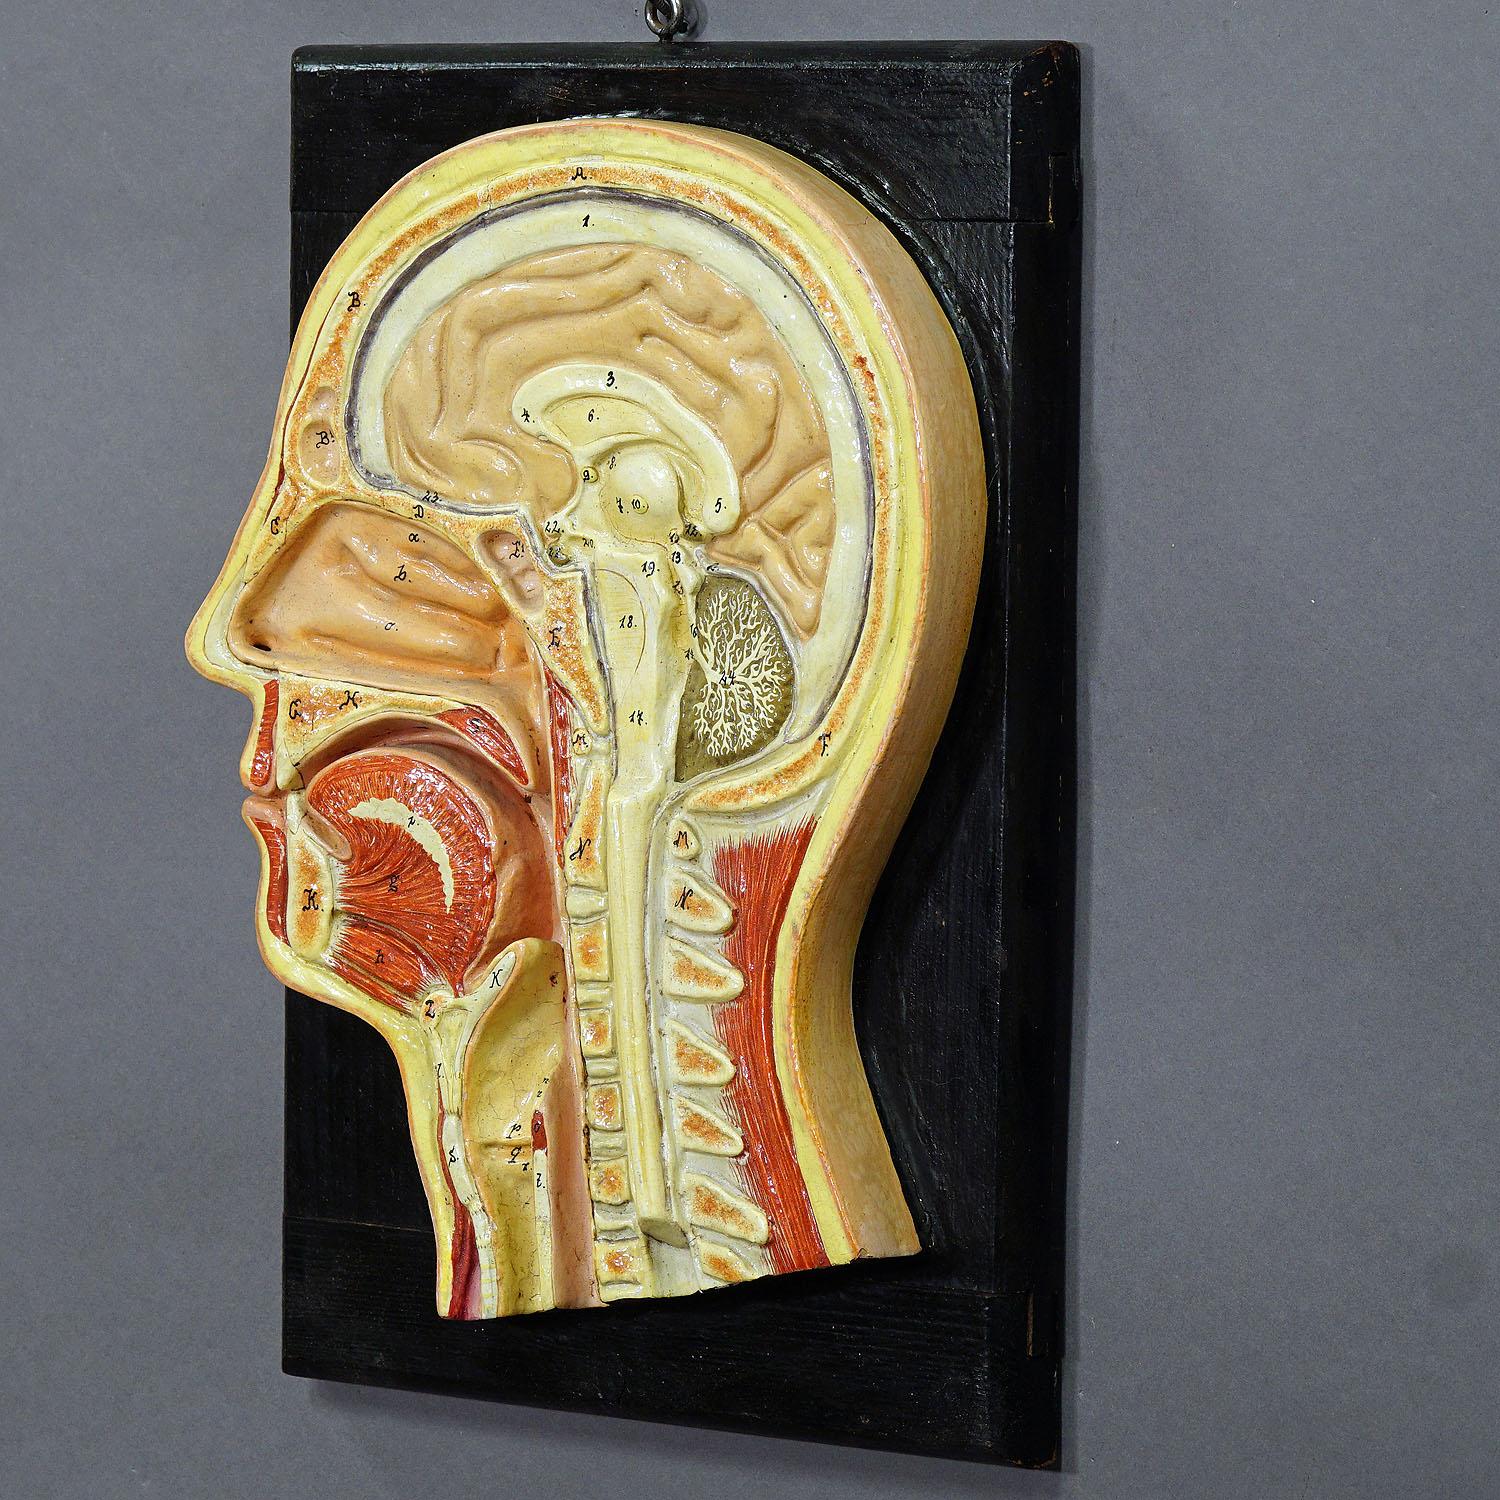 A great antique hand-painted and hand lettered anatomical model. A median incision of the head for class. It is made of wood, papier maché and plaster, manufactured by SOMSO or PHYWE, Germany ca. 1920.

Measures: Width: 8.66